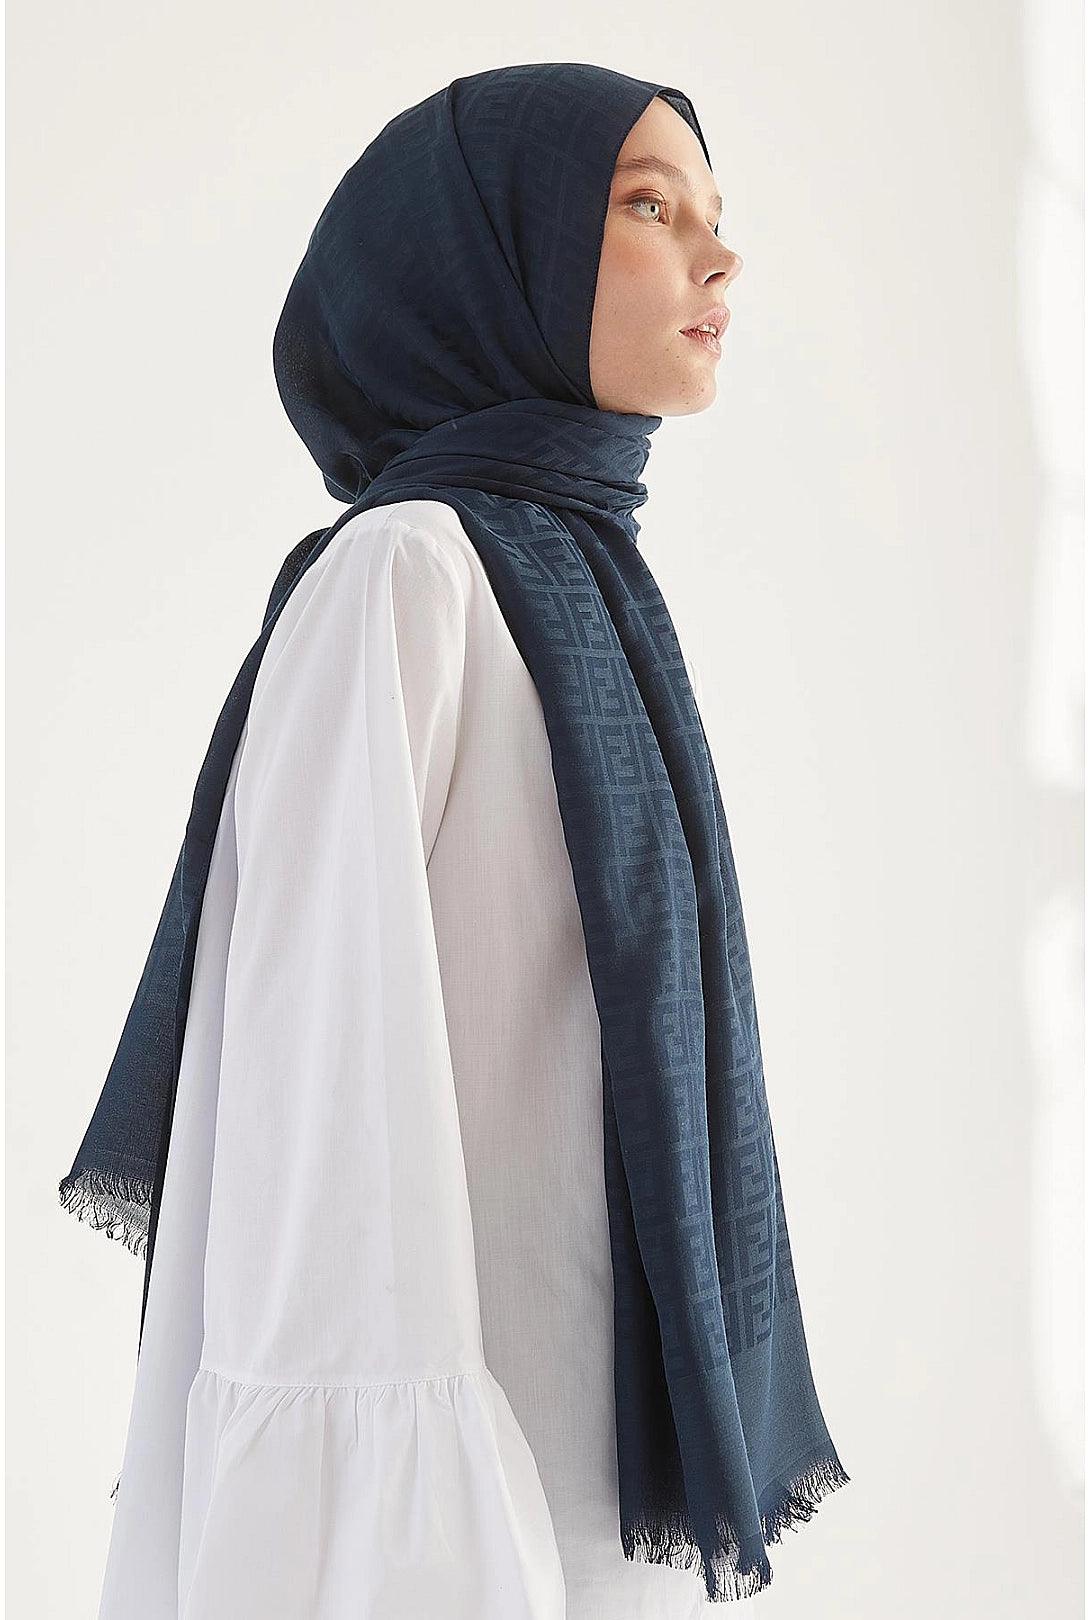 Cotton Hijab Scarf Shawl with Patterns - Navy Blue